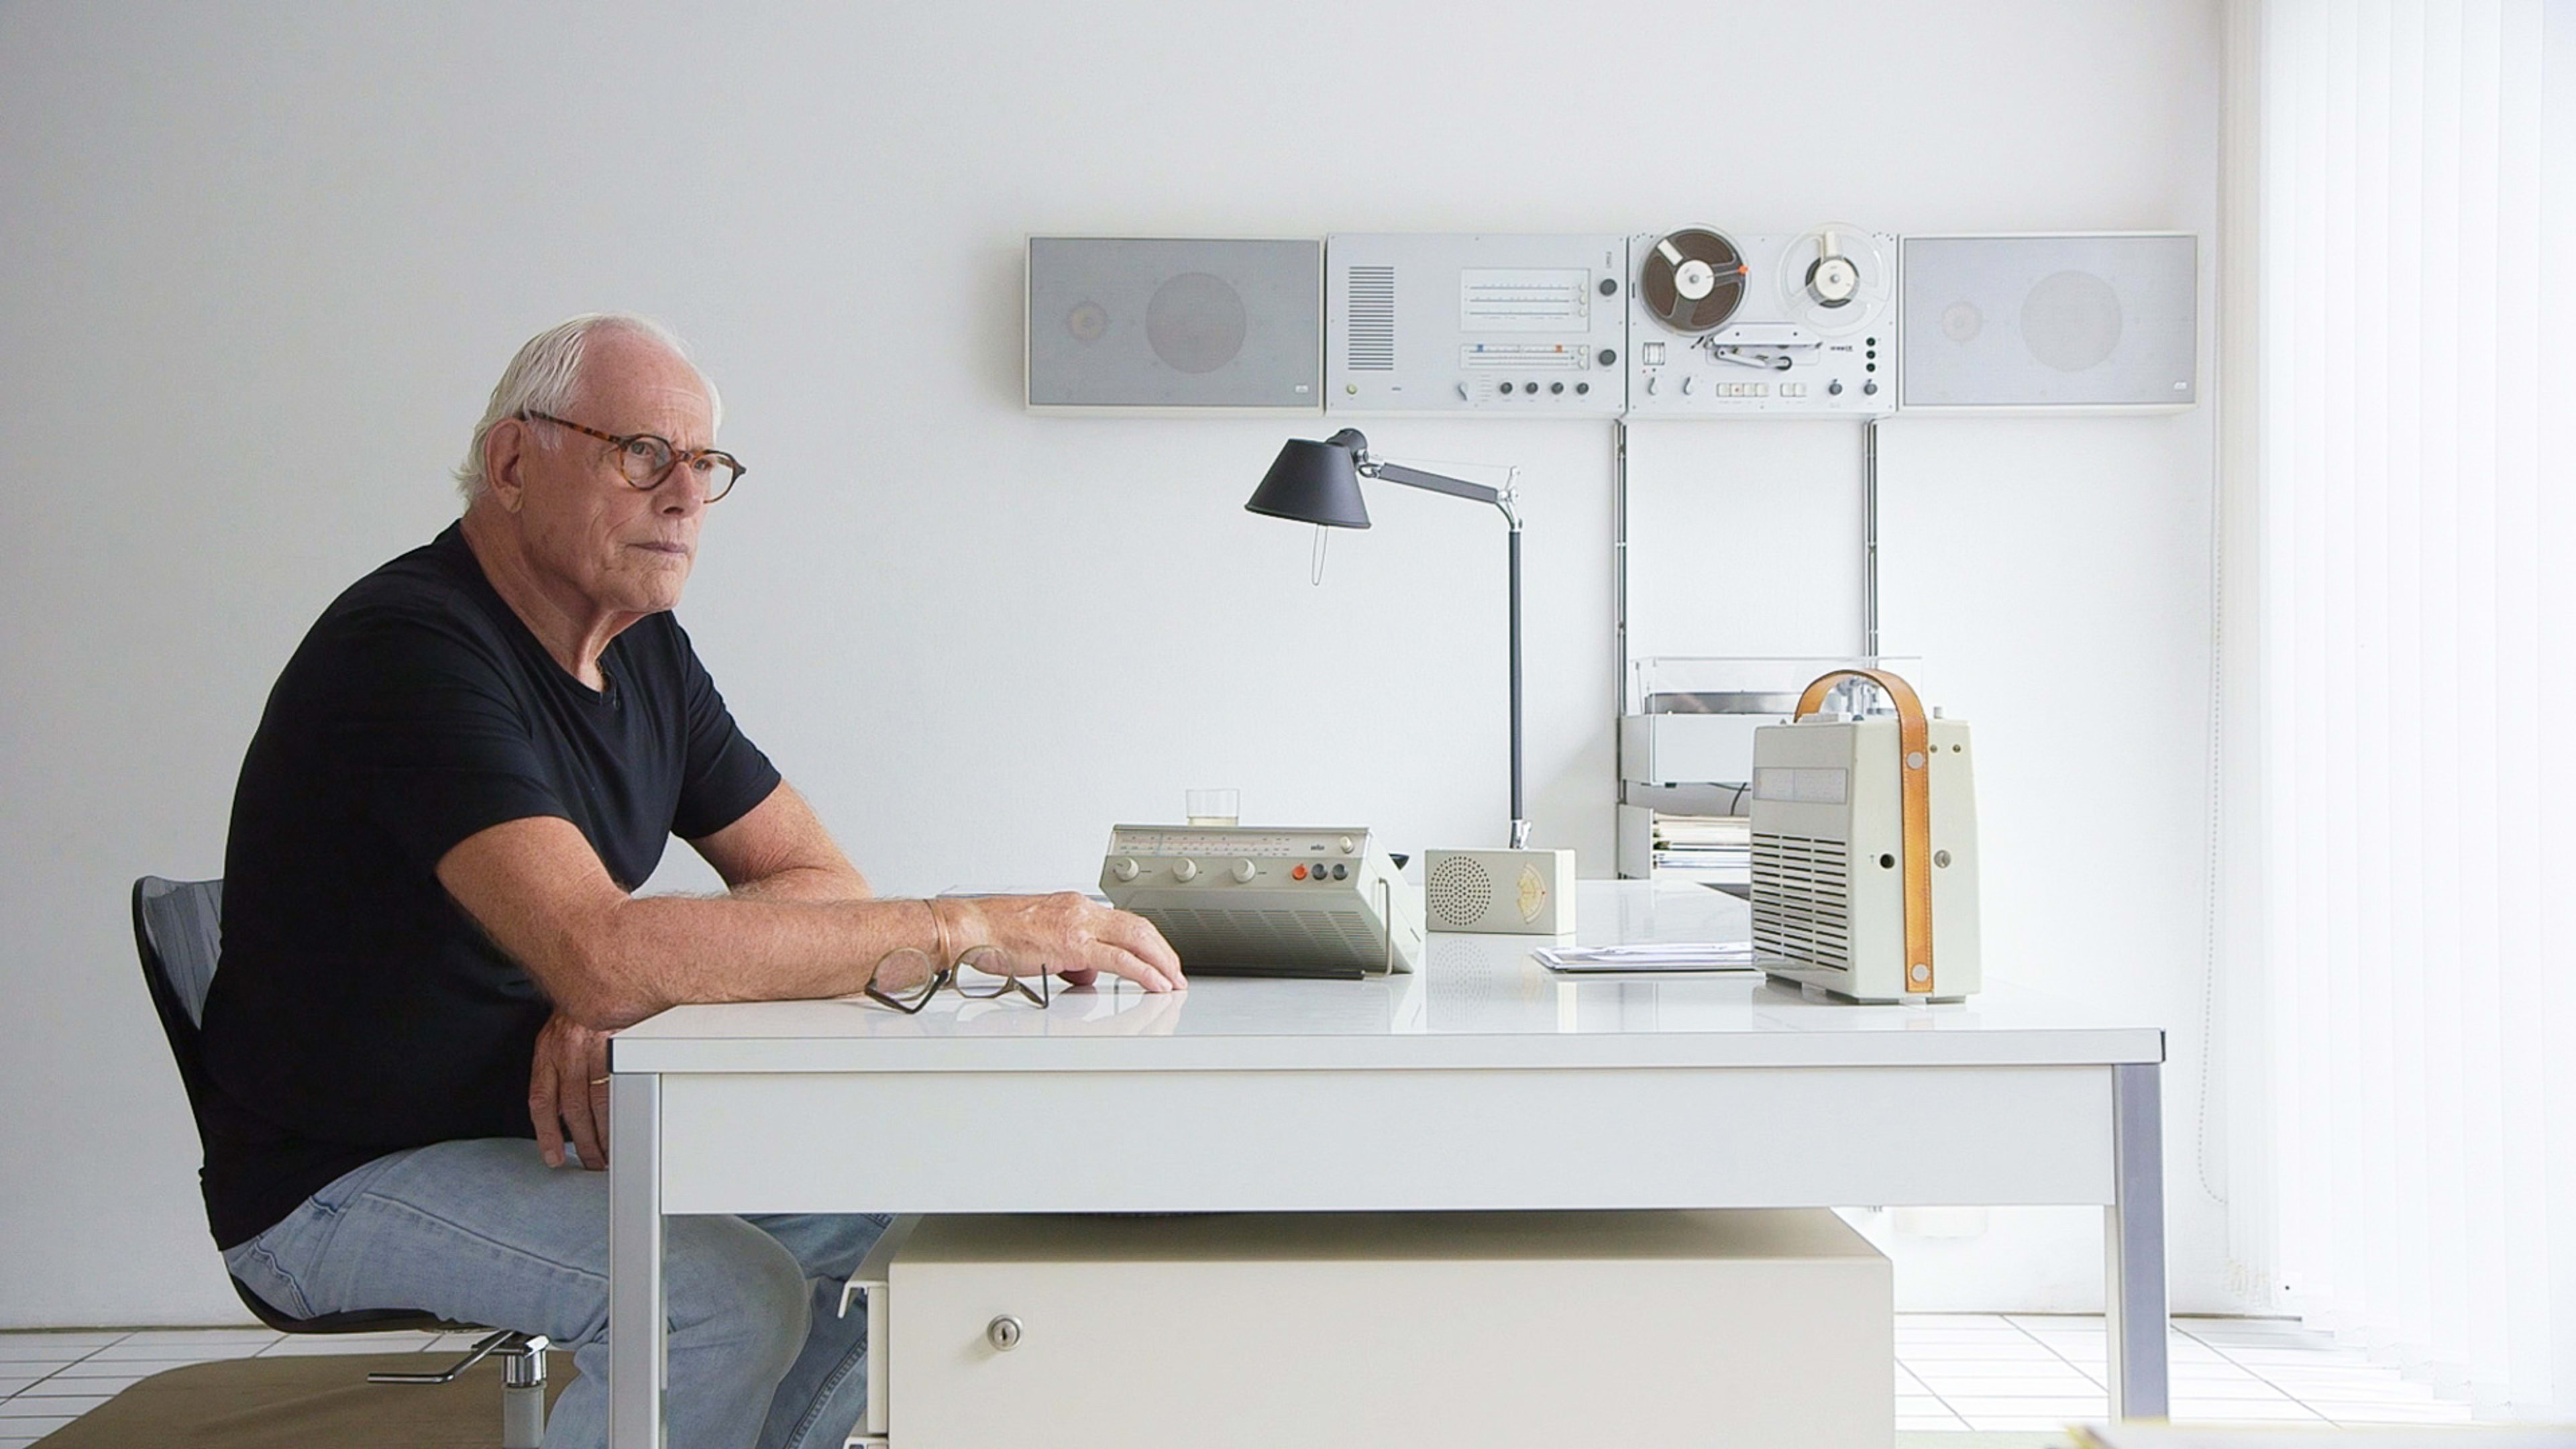 Dieter Rams’s 10 Principles of Design, illustrated by his ingenious products